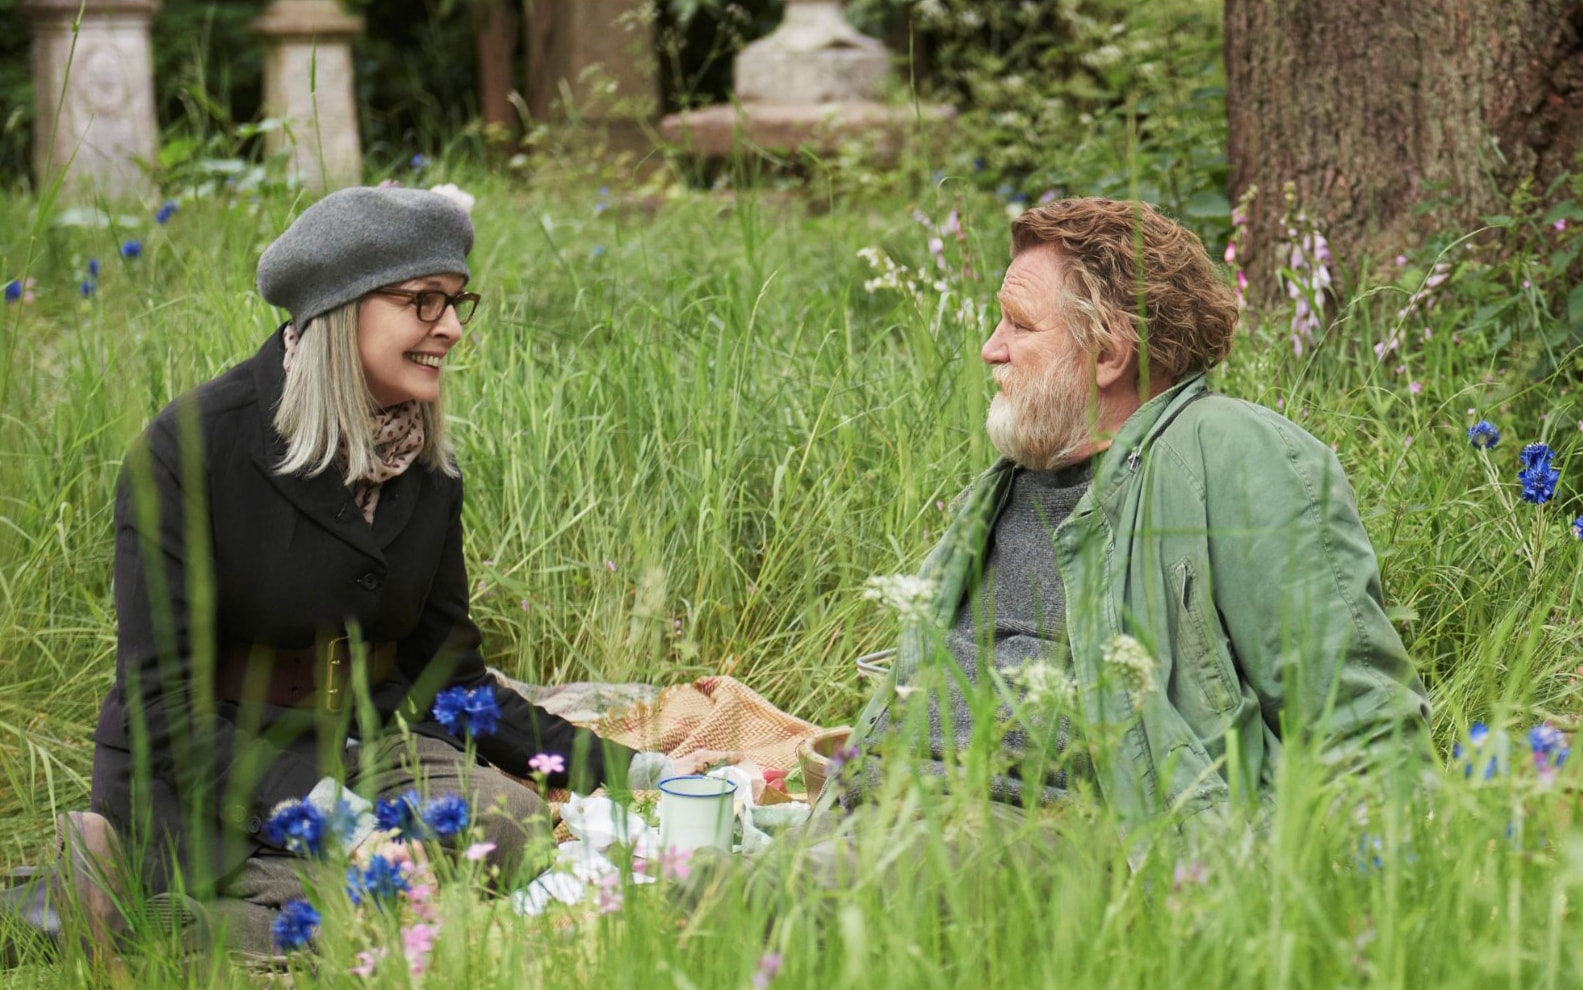 Movie of the week: buy “Hampstead: It's never too late to love”, with Diane Keaton and Brendan Gleeson, for R $ 9.90!